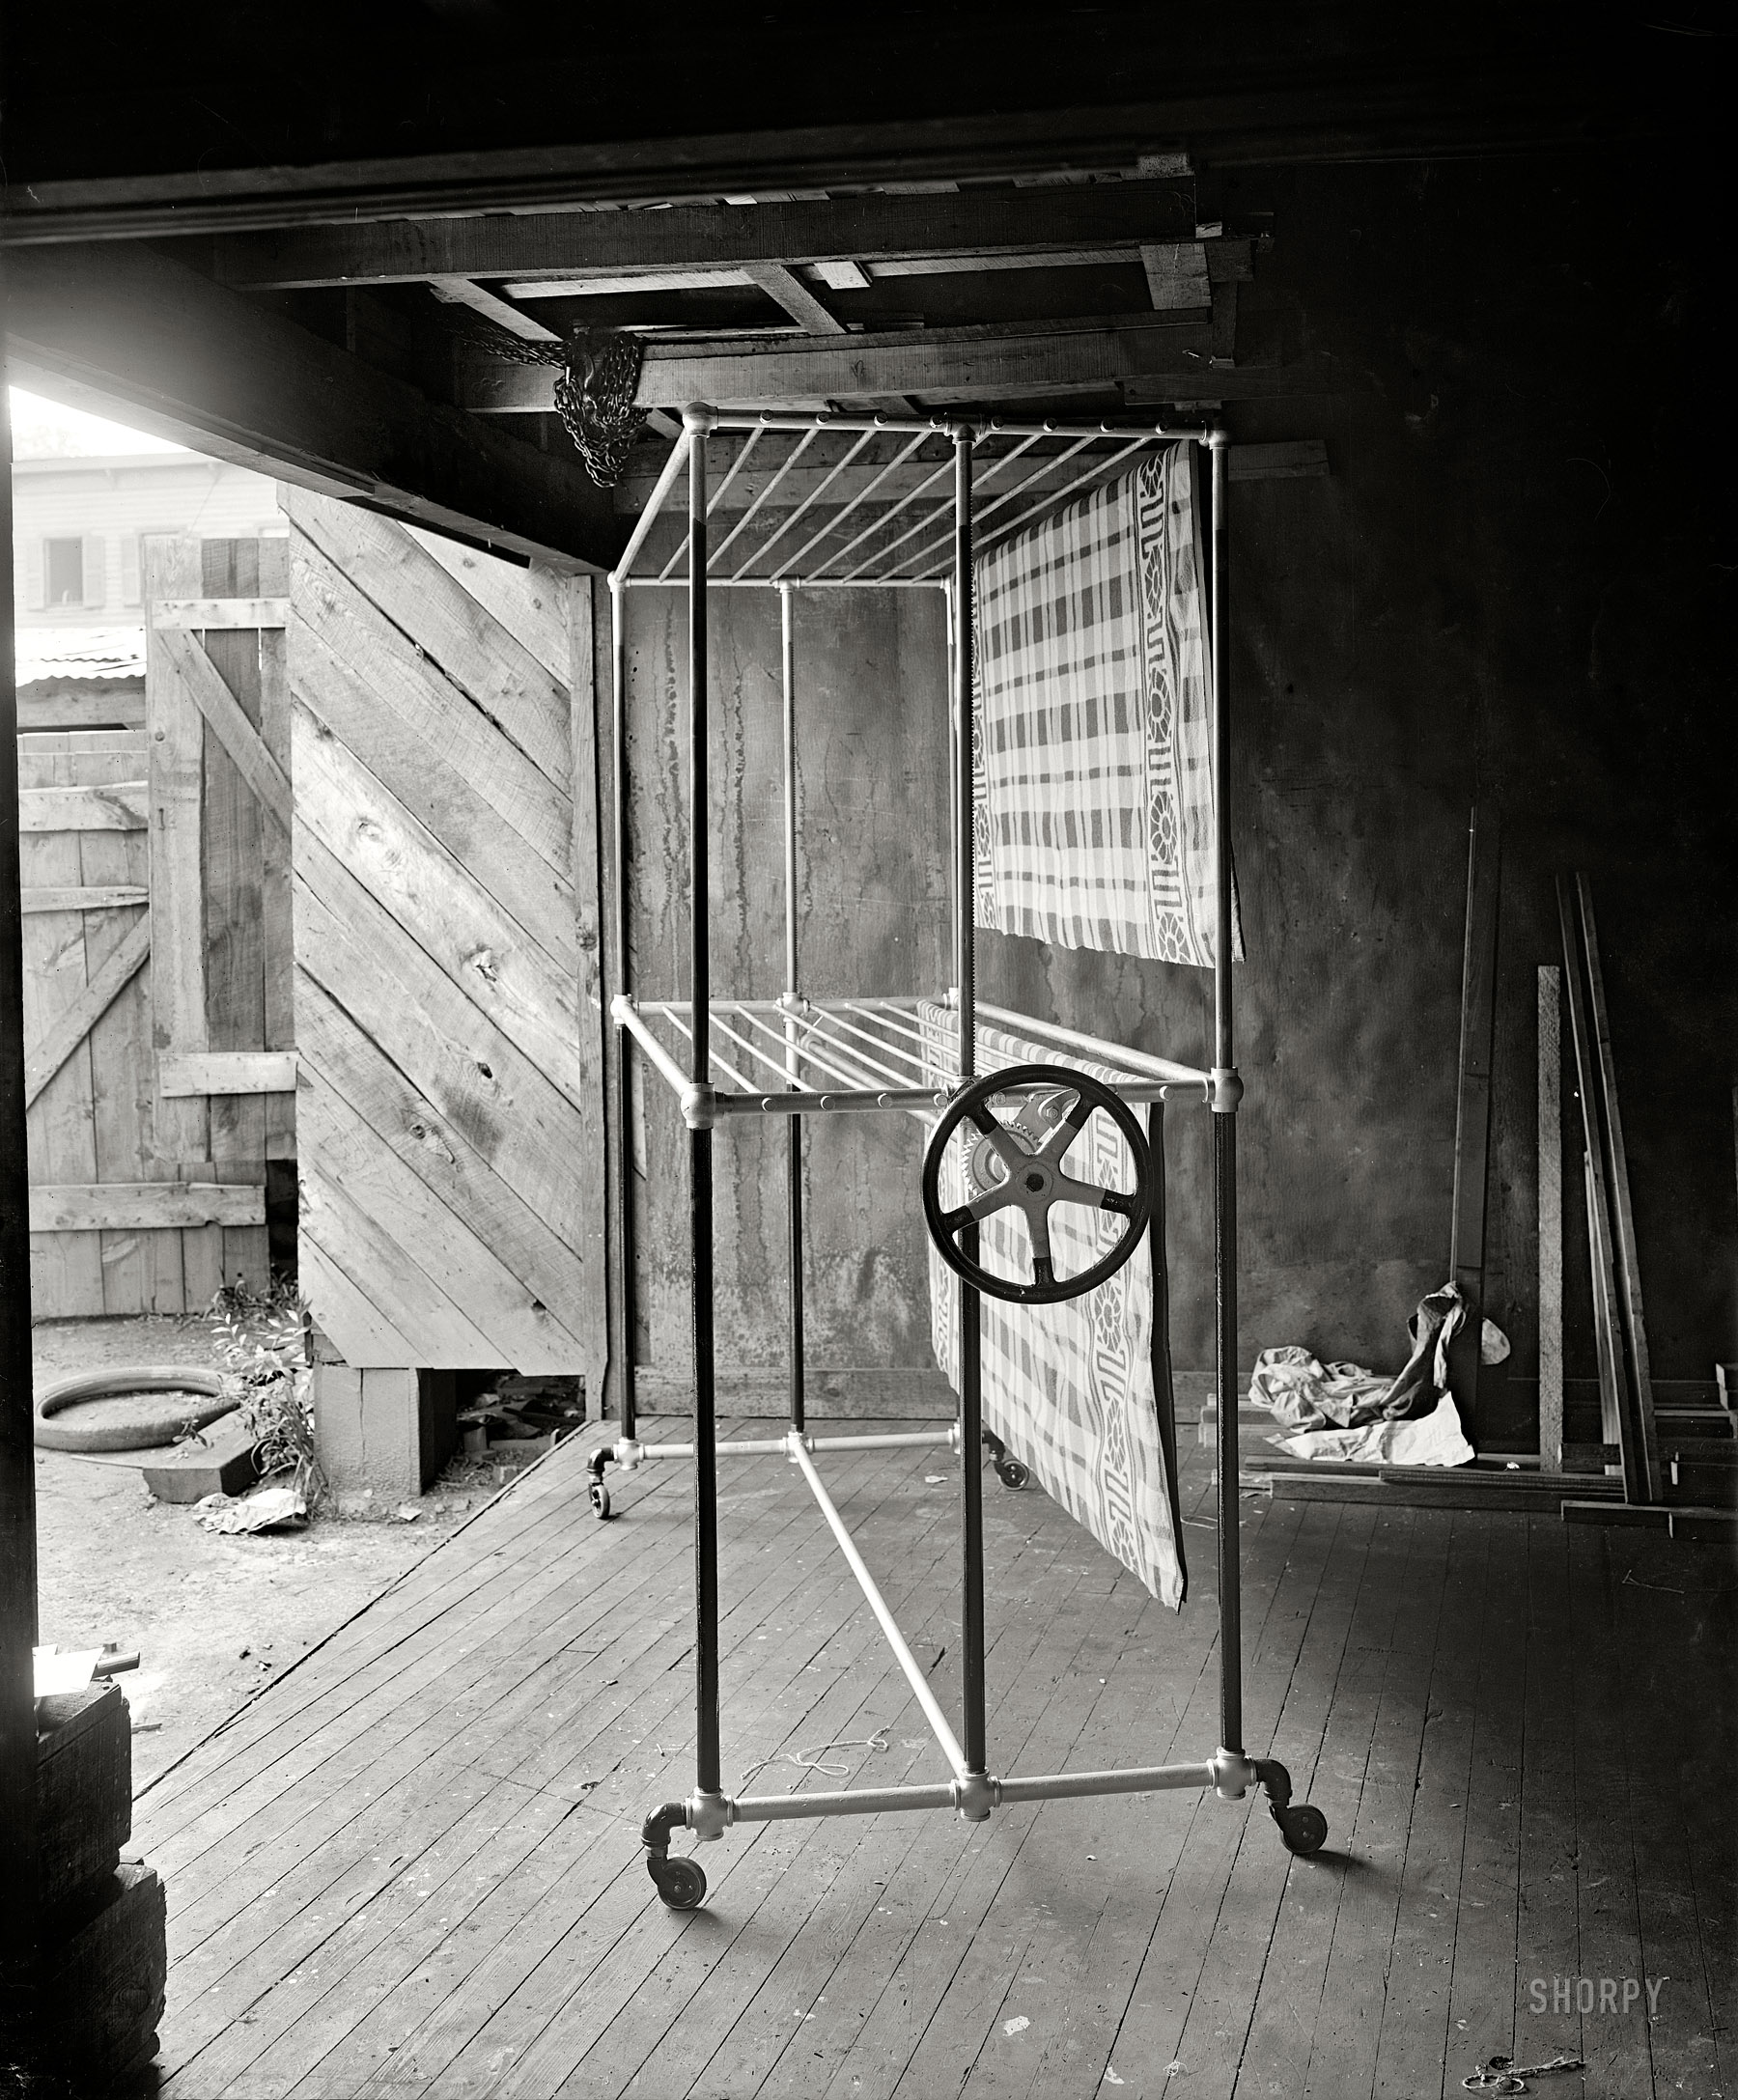 Washington, D.C., circa 1922. "Abe Cohen." Probably not Abe himself, but you never know. This is just the kind of malevolent-looking contraption that keeps Stephen King in business. National Photo glass negative. View full size.